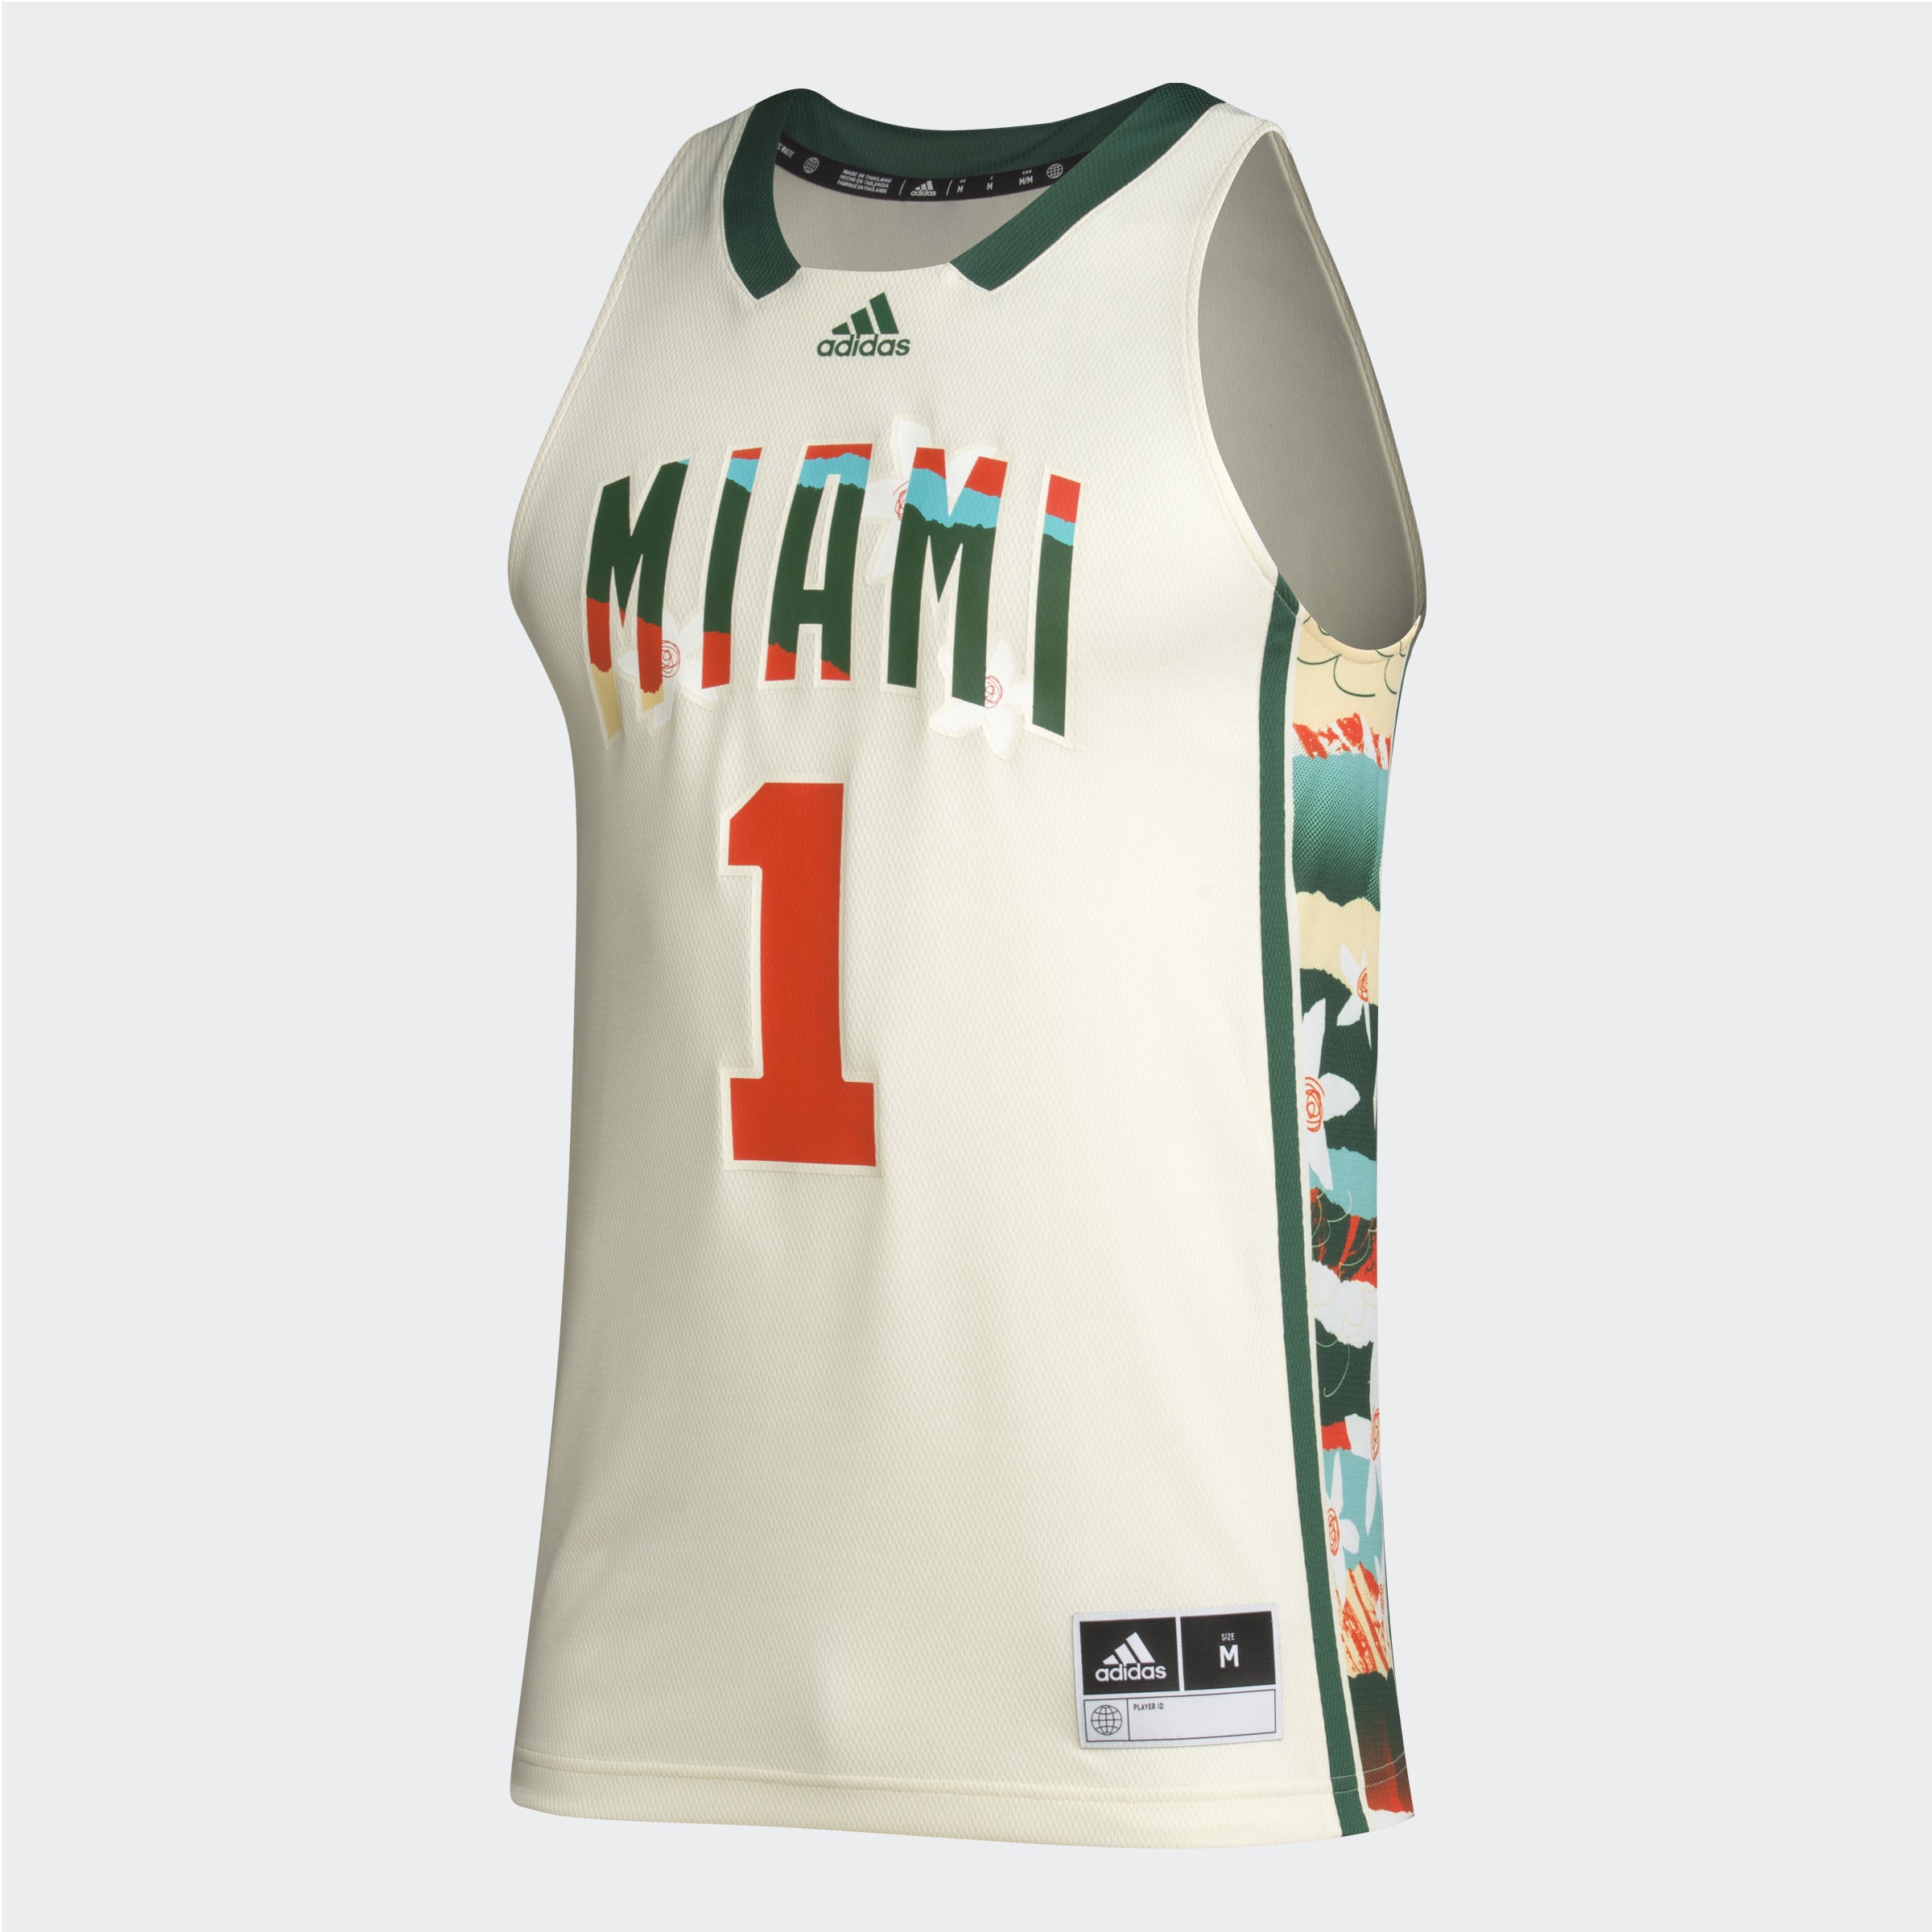 Miami Hurricanes adidas Honoring Black Excellence Basketball Jersey 